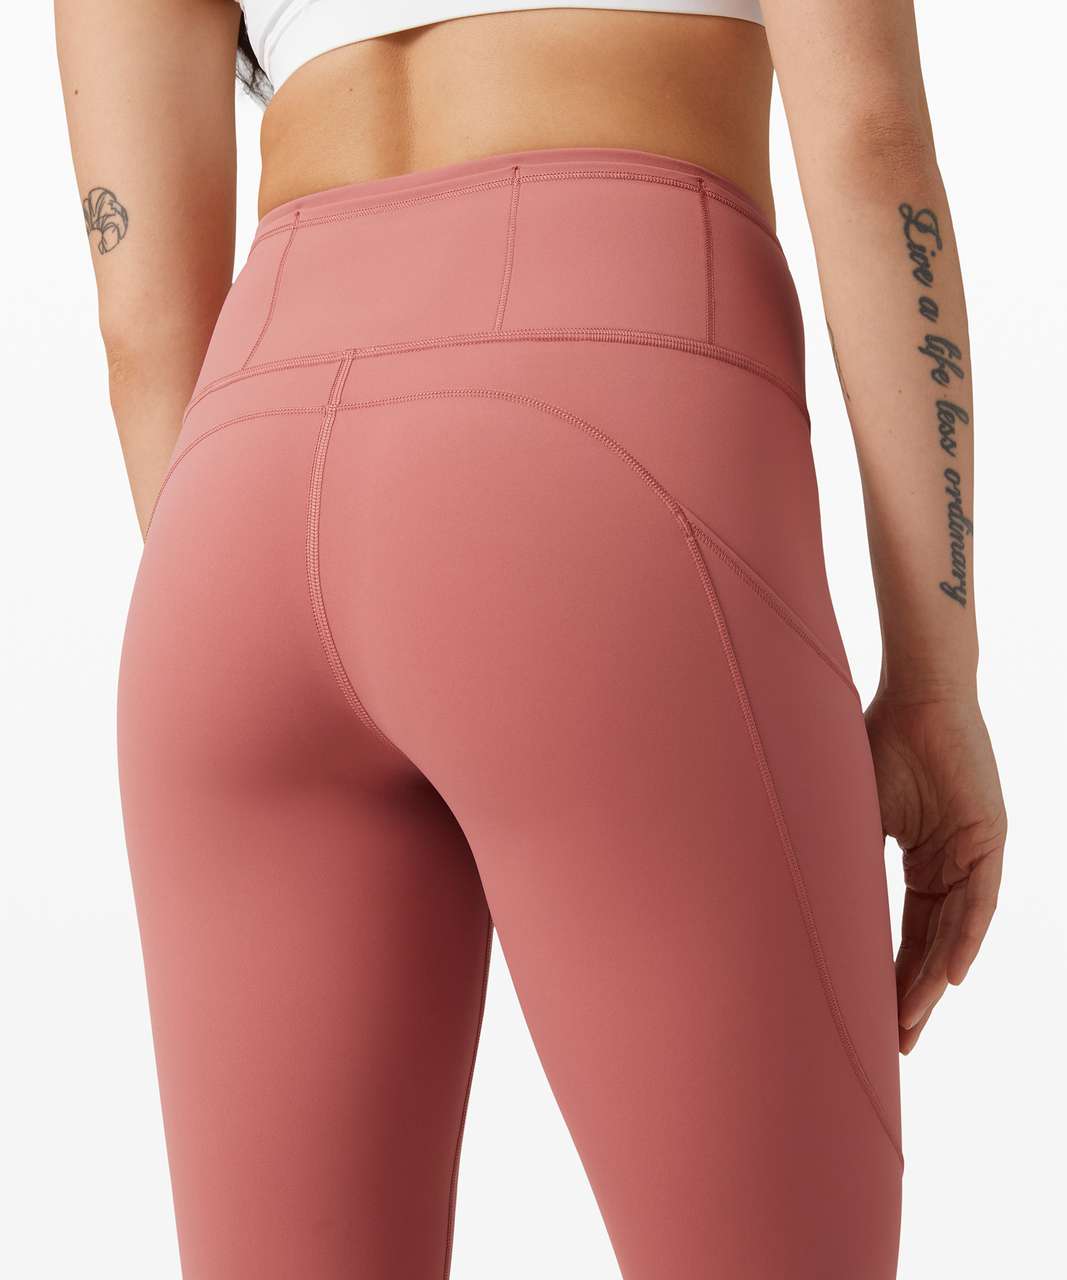 Lululemon Fast Free Size 4 High-Rise Tight 25” Brushed Nulux